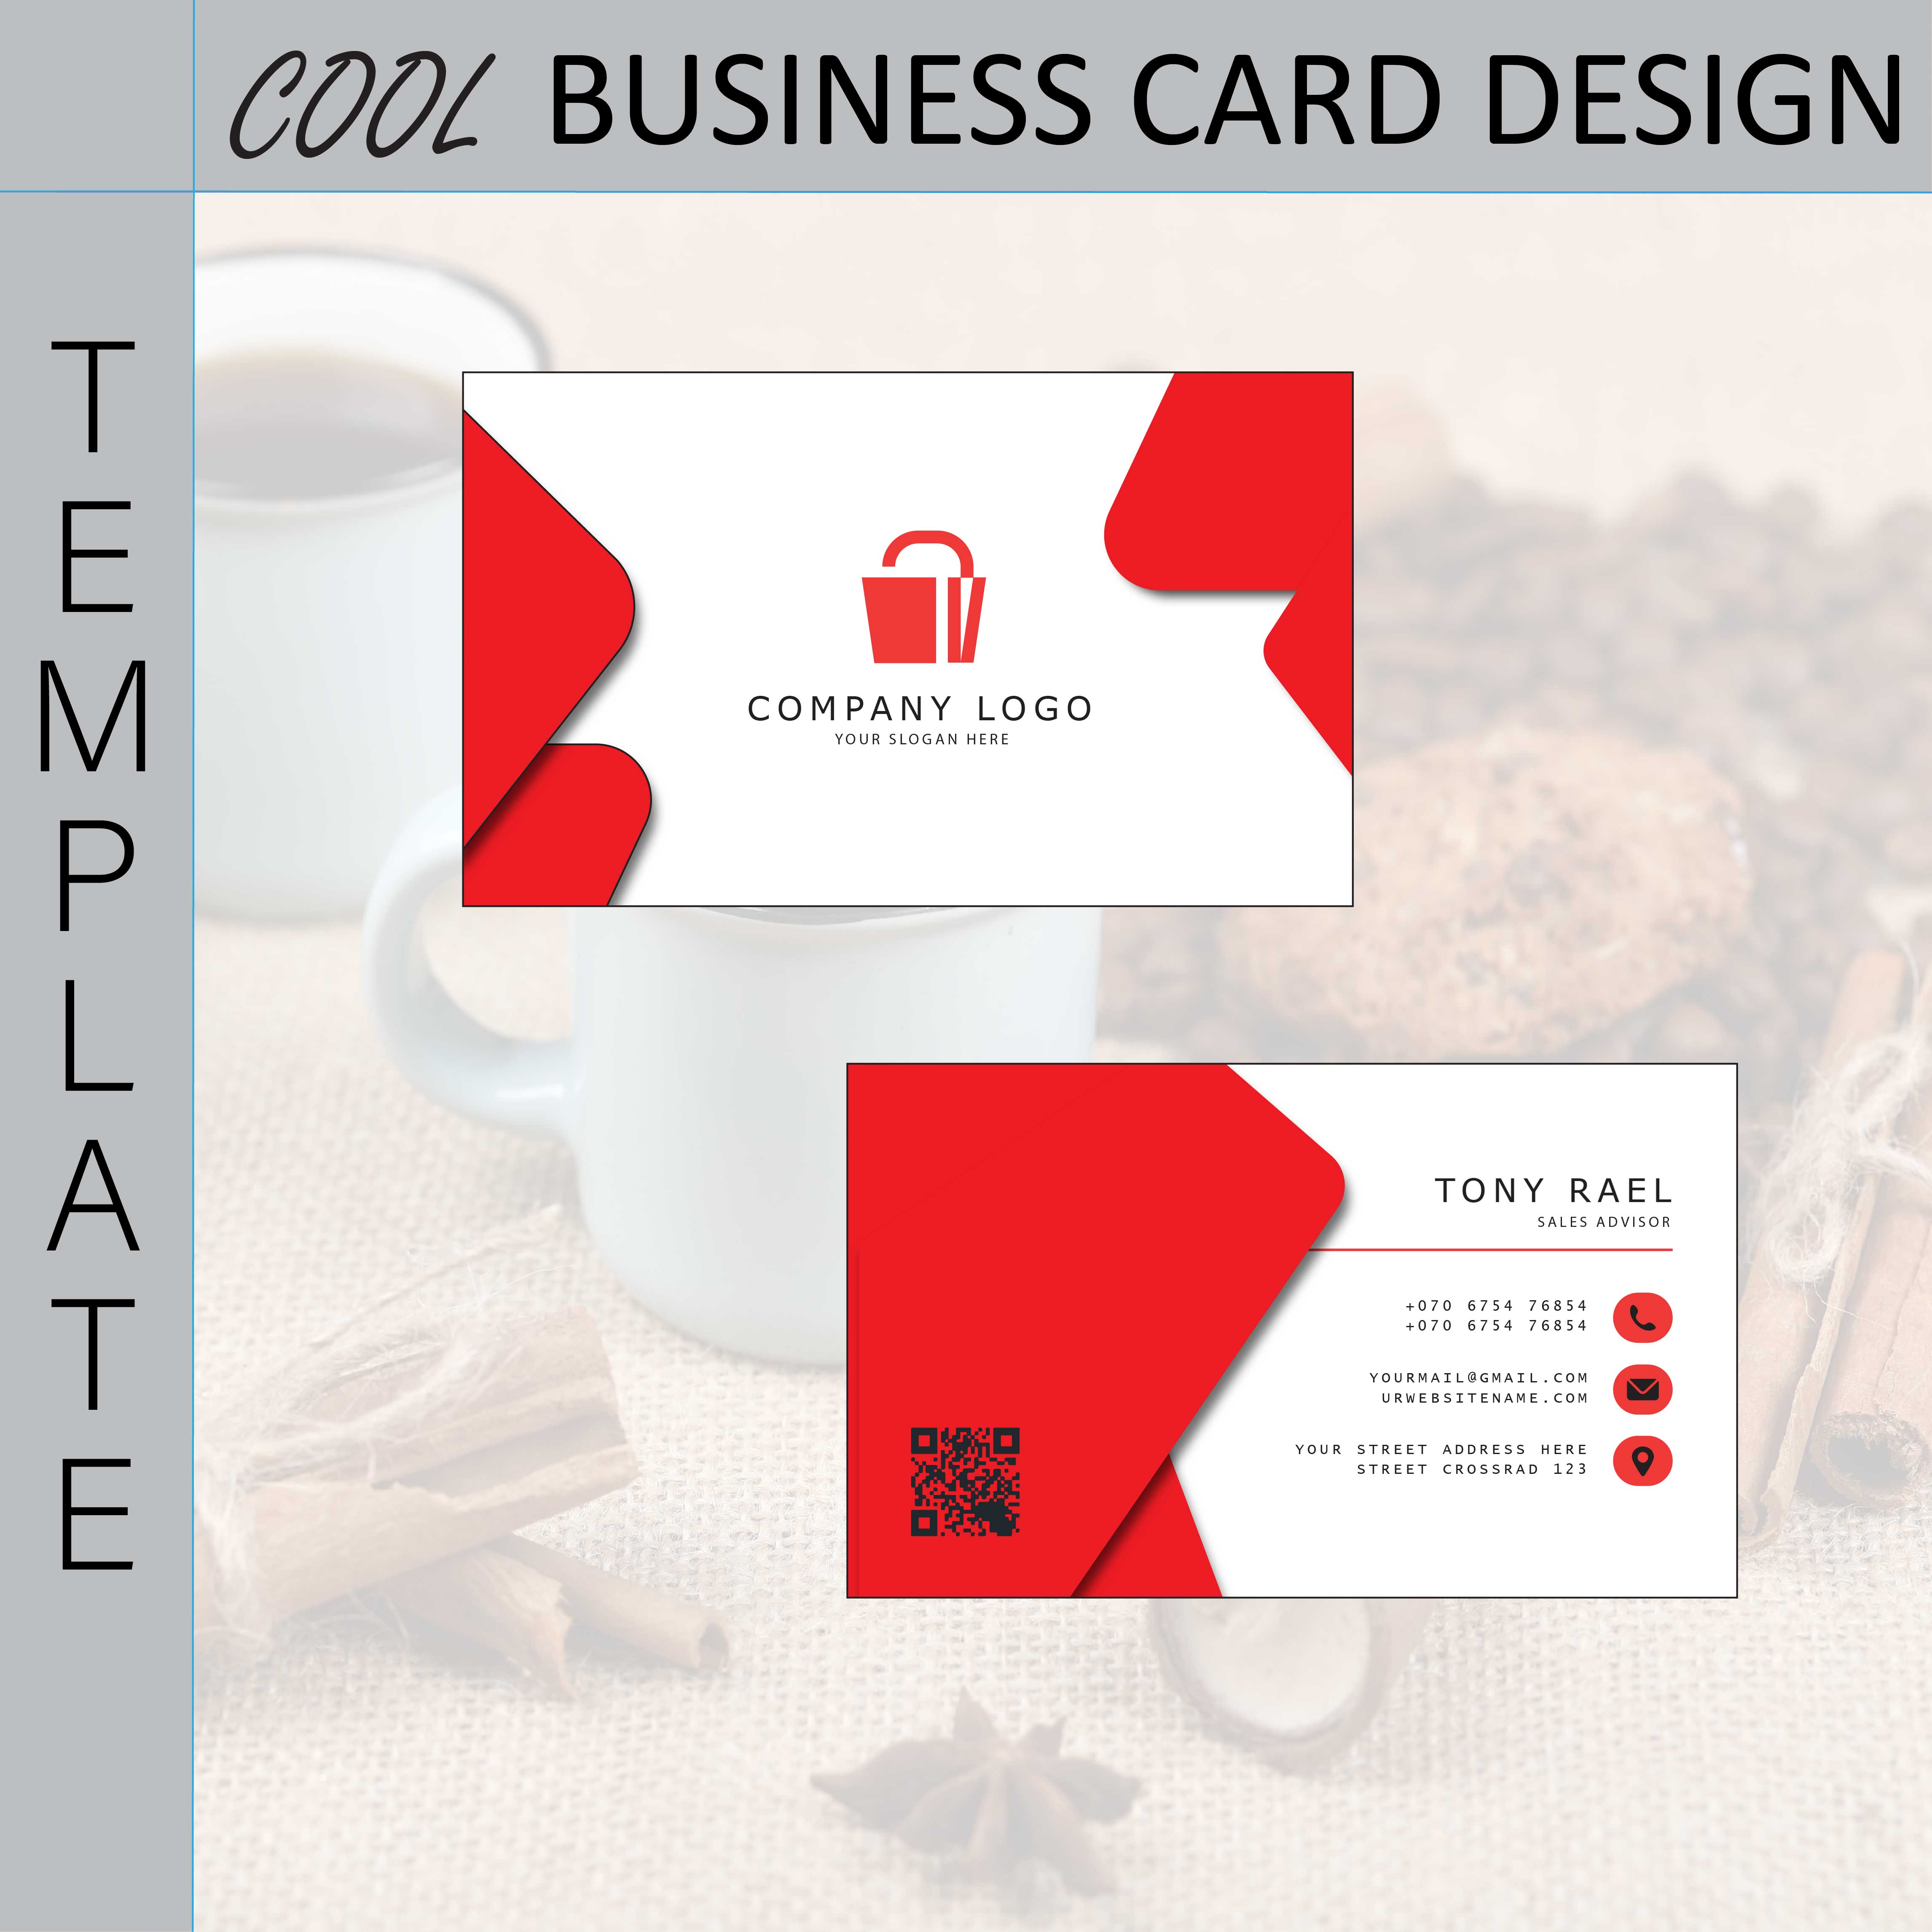 Minimalist Business Card Template (Editable) cover image.